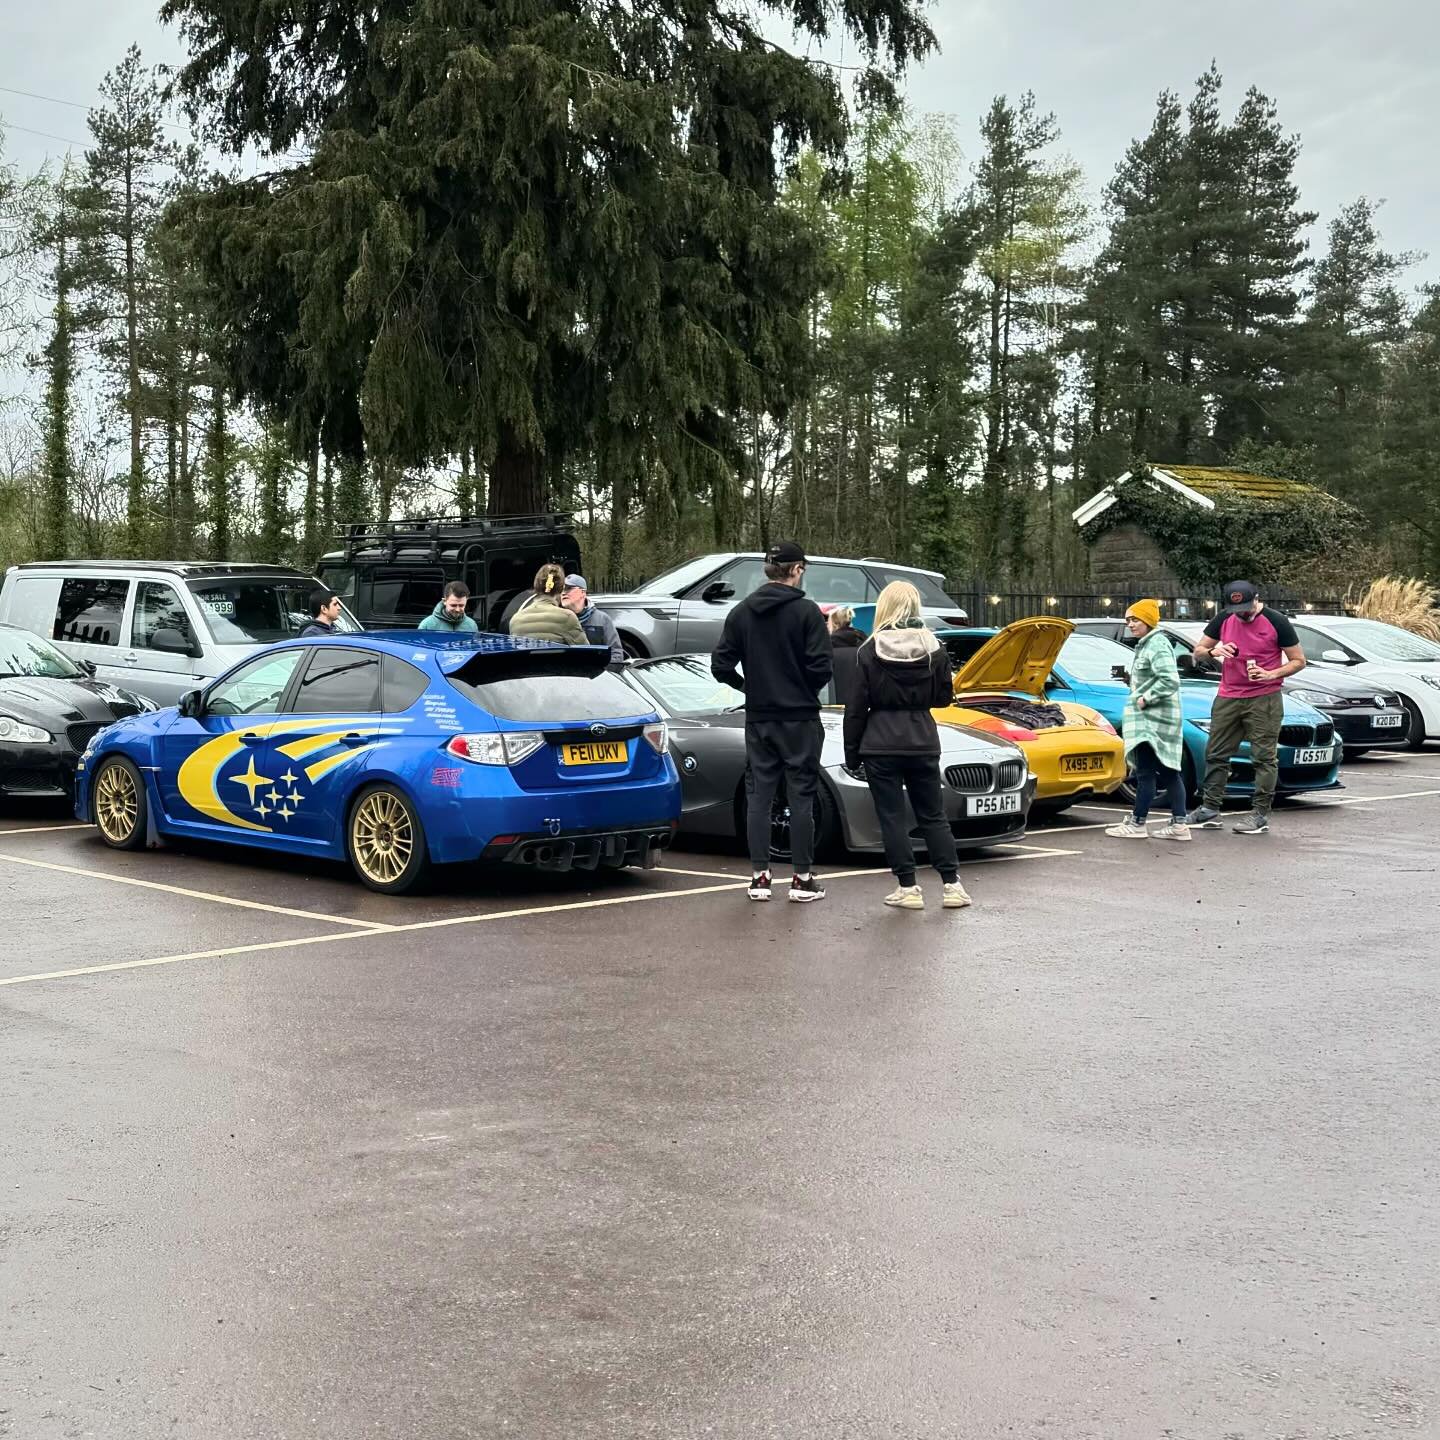 Shots from the Dragon Run last weekend in Wales. Weather held out until the last hour luckily. Great bunch of peeps and a proper mix of different cars. Impreza WRX, Boxter S, CRZ, 440i, Z4, Golf GTI, and an R8. A big thank you to BaffleHaus for hosti